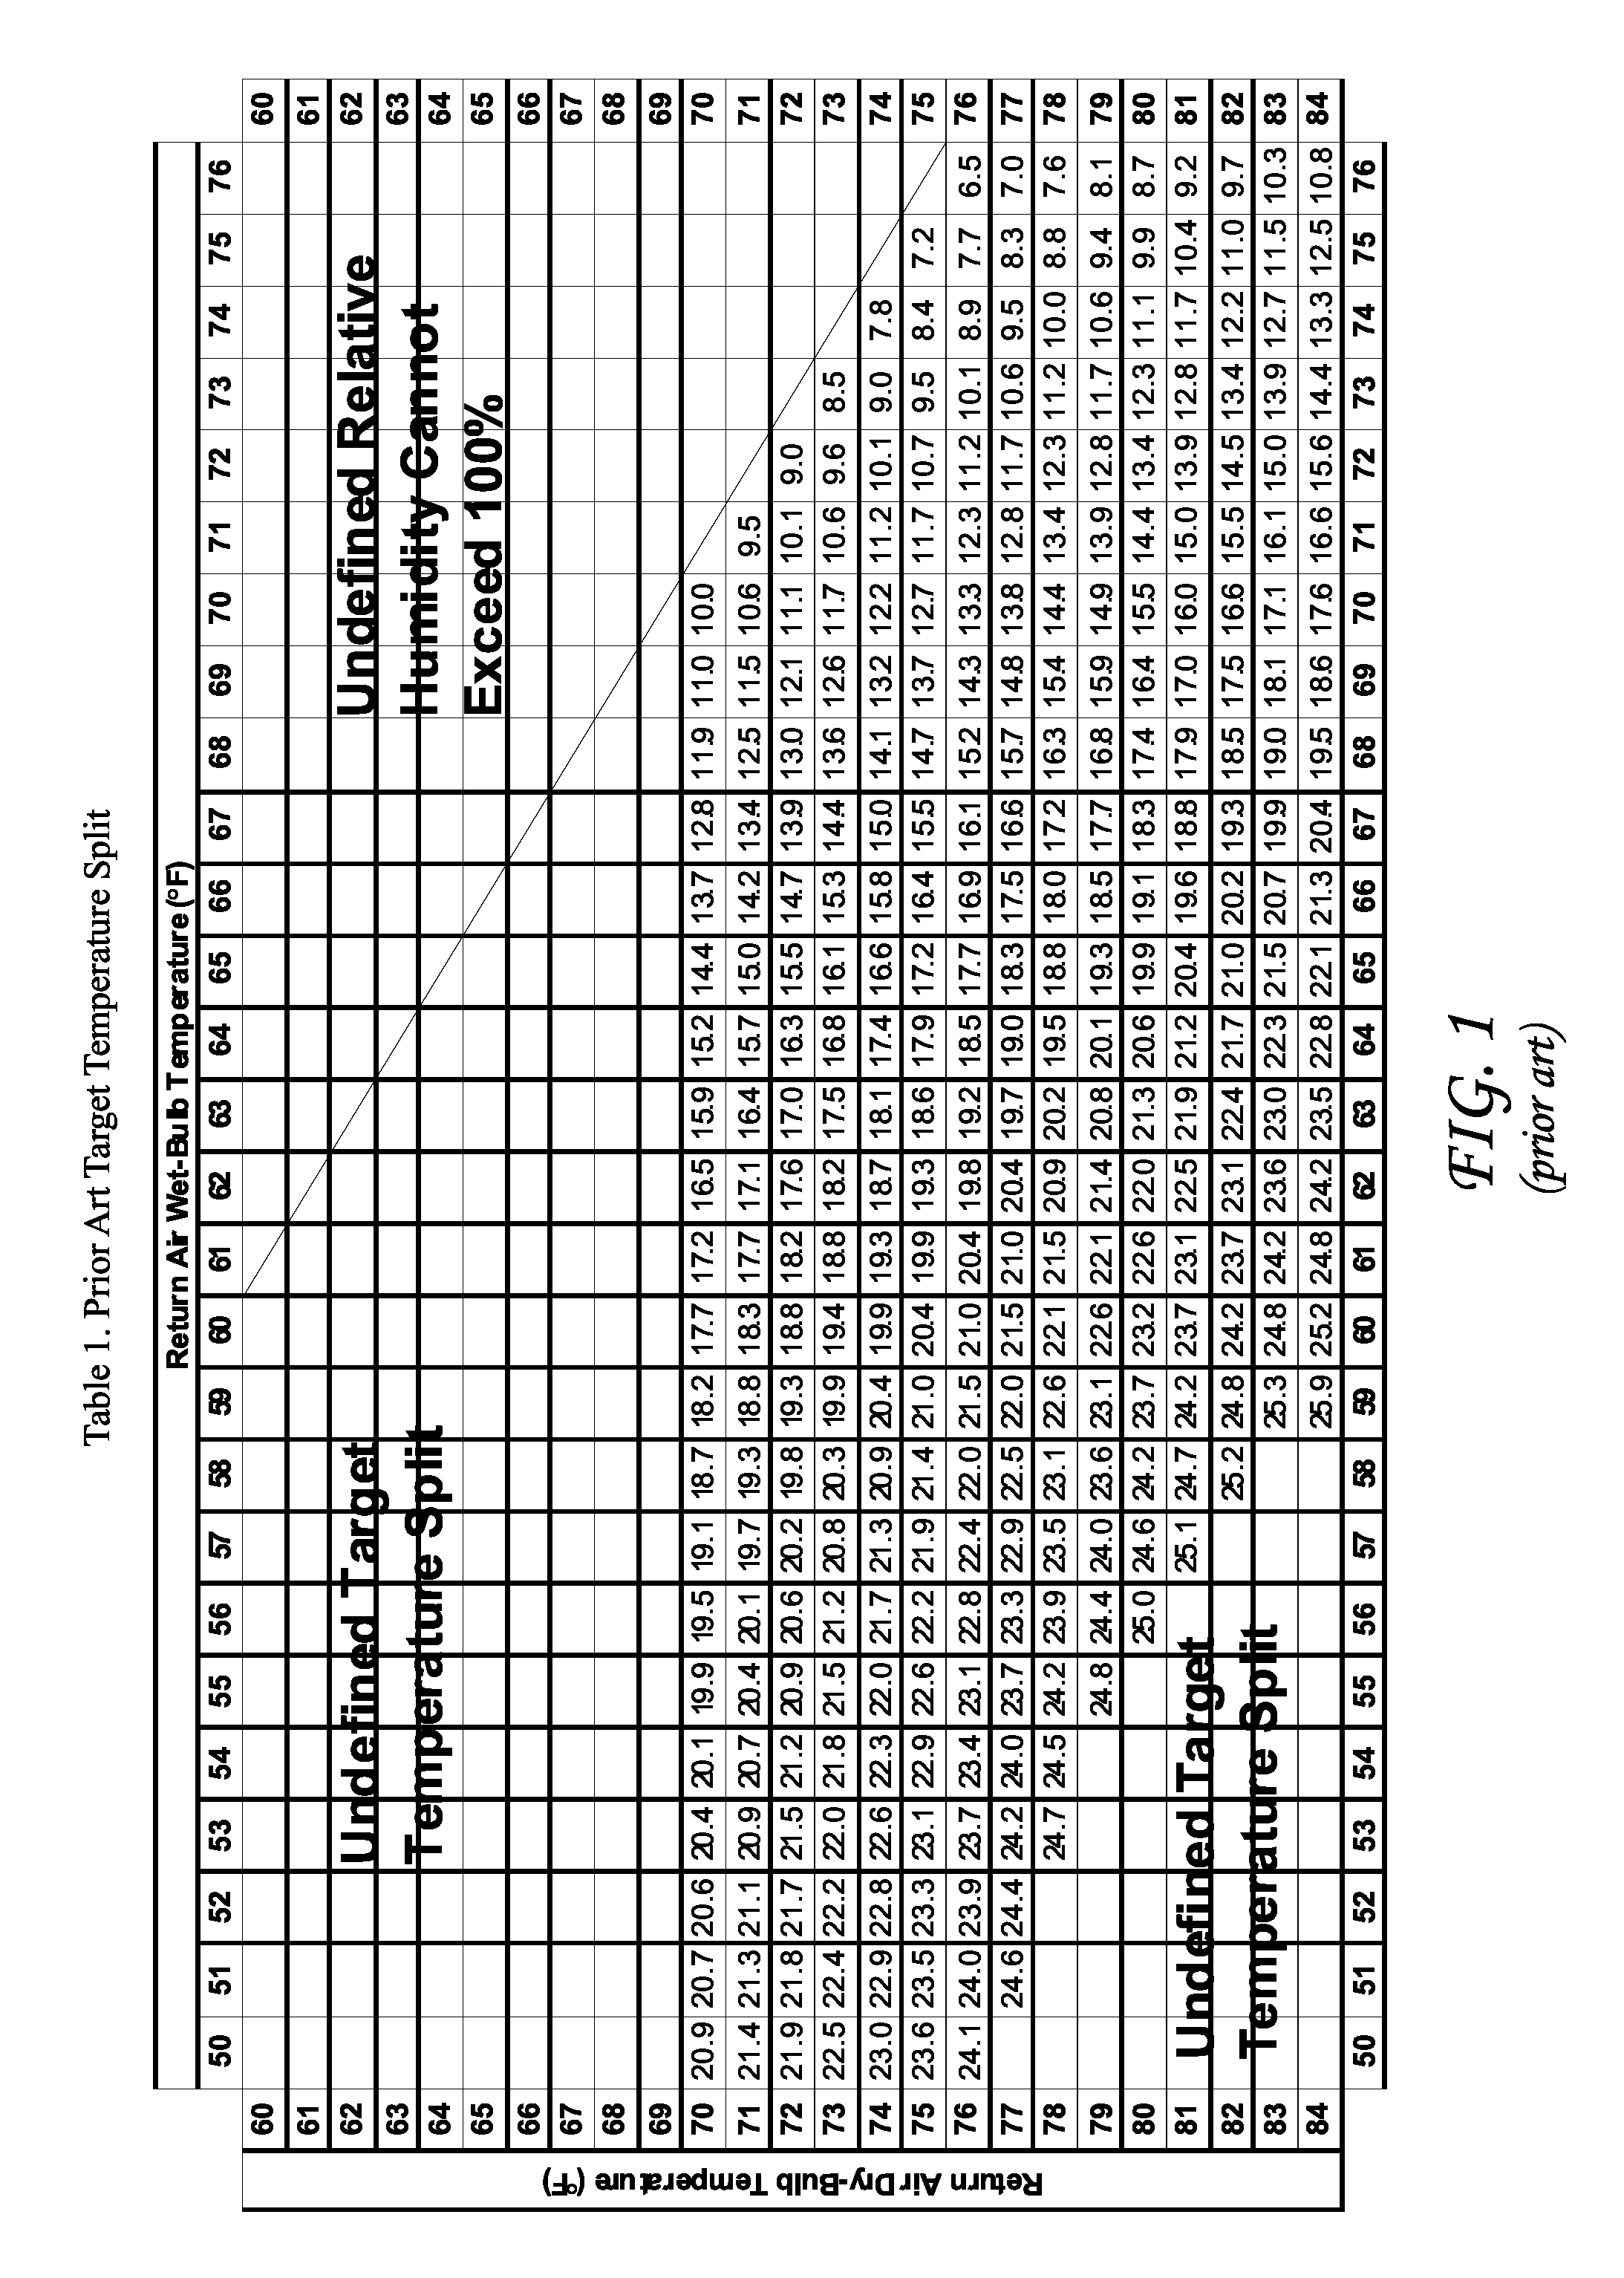 Method for calculating target temperature split, target superheat, target enthalpy, and energy efficiency ratio improvements for air conditioners and heat pumps in cooling mode